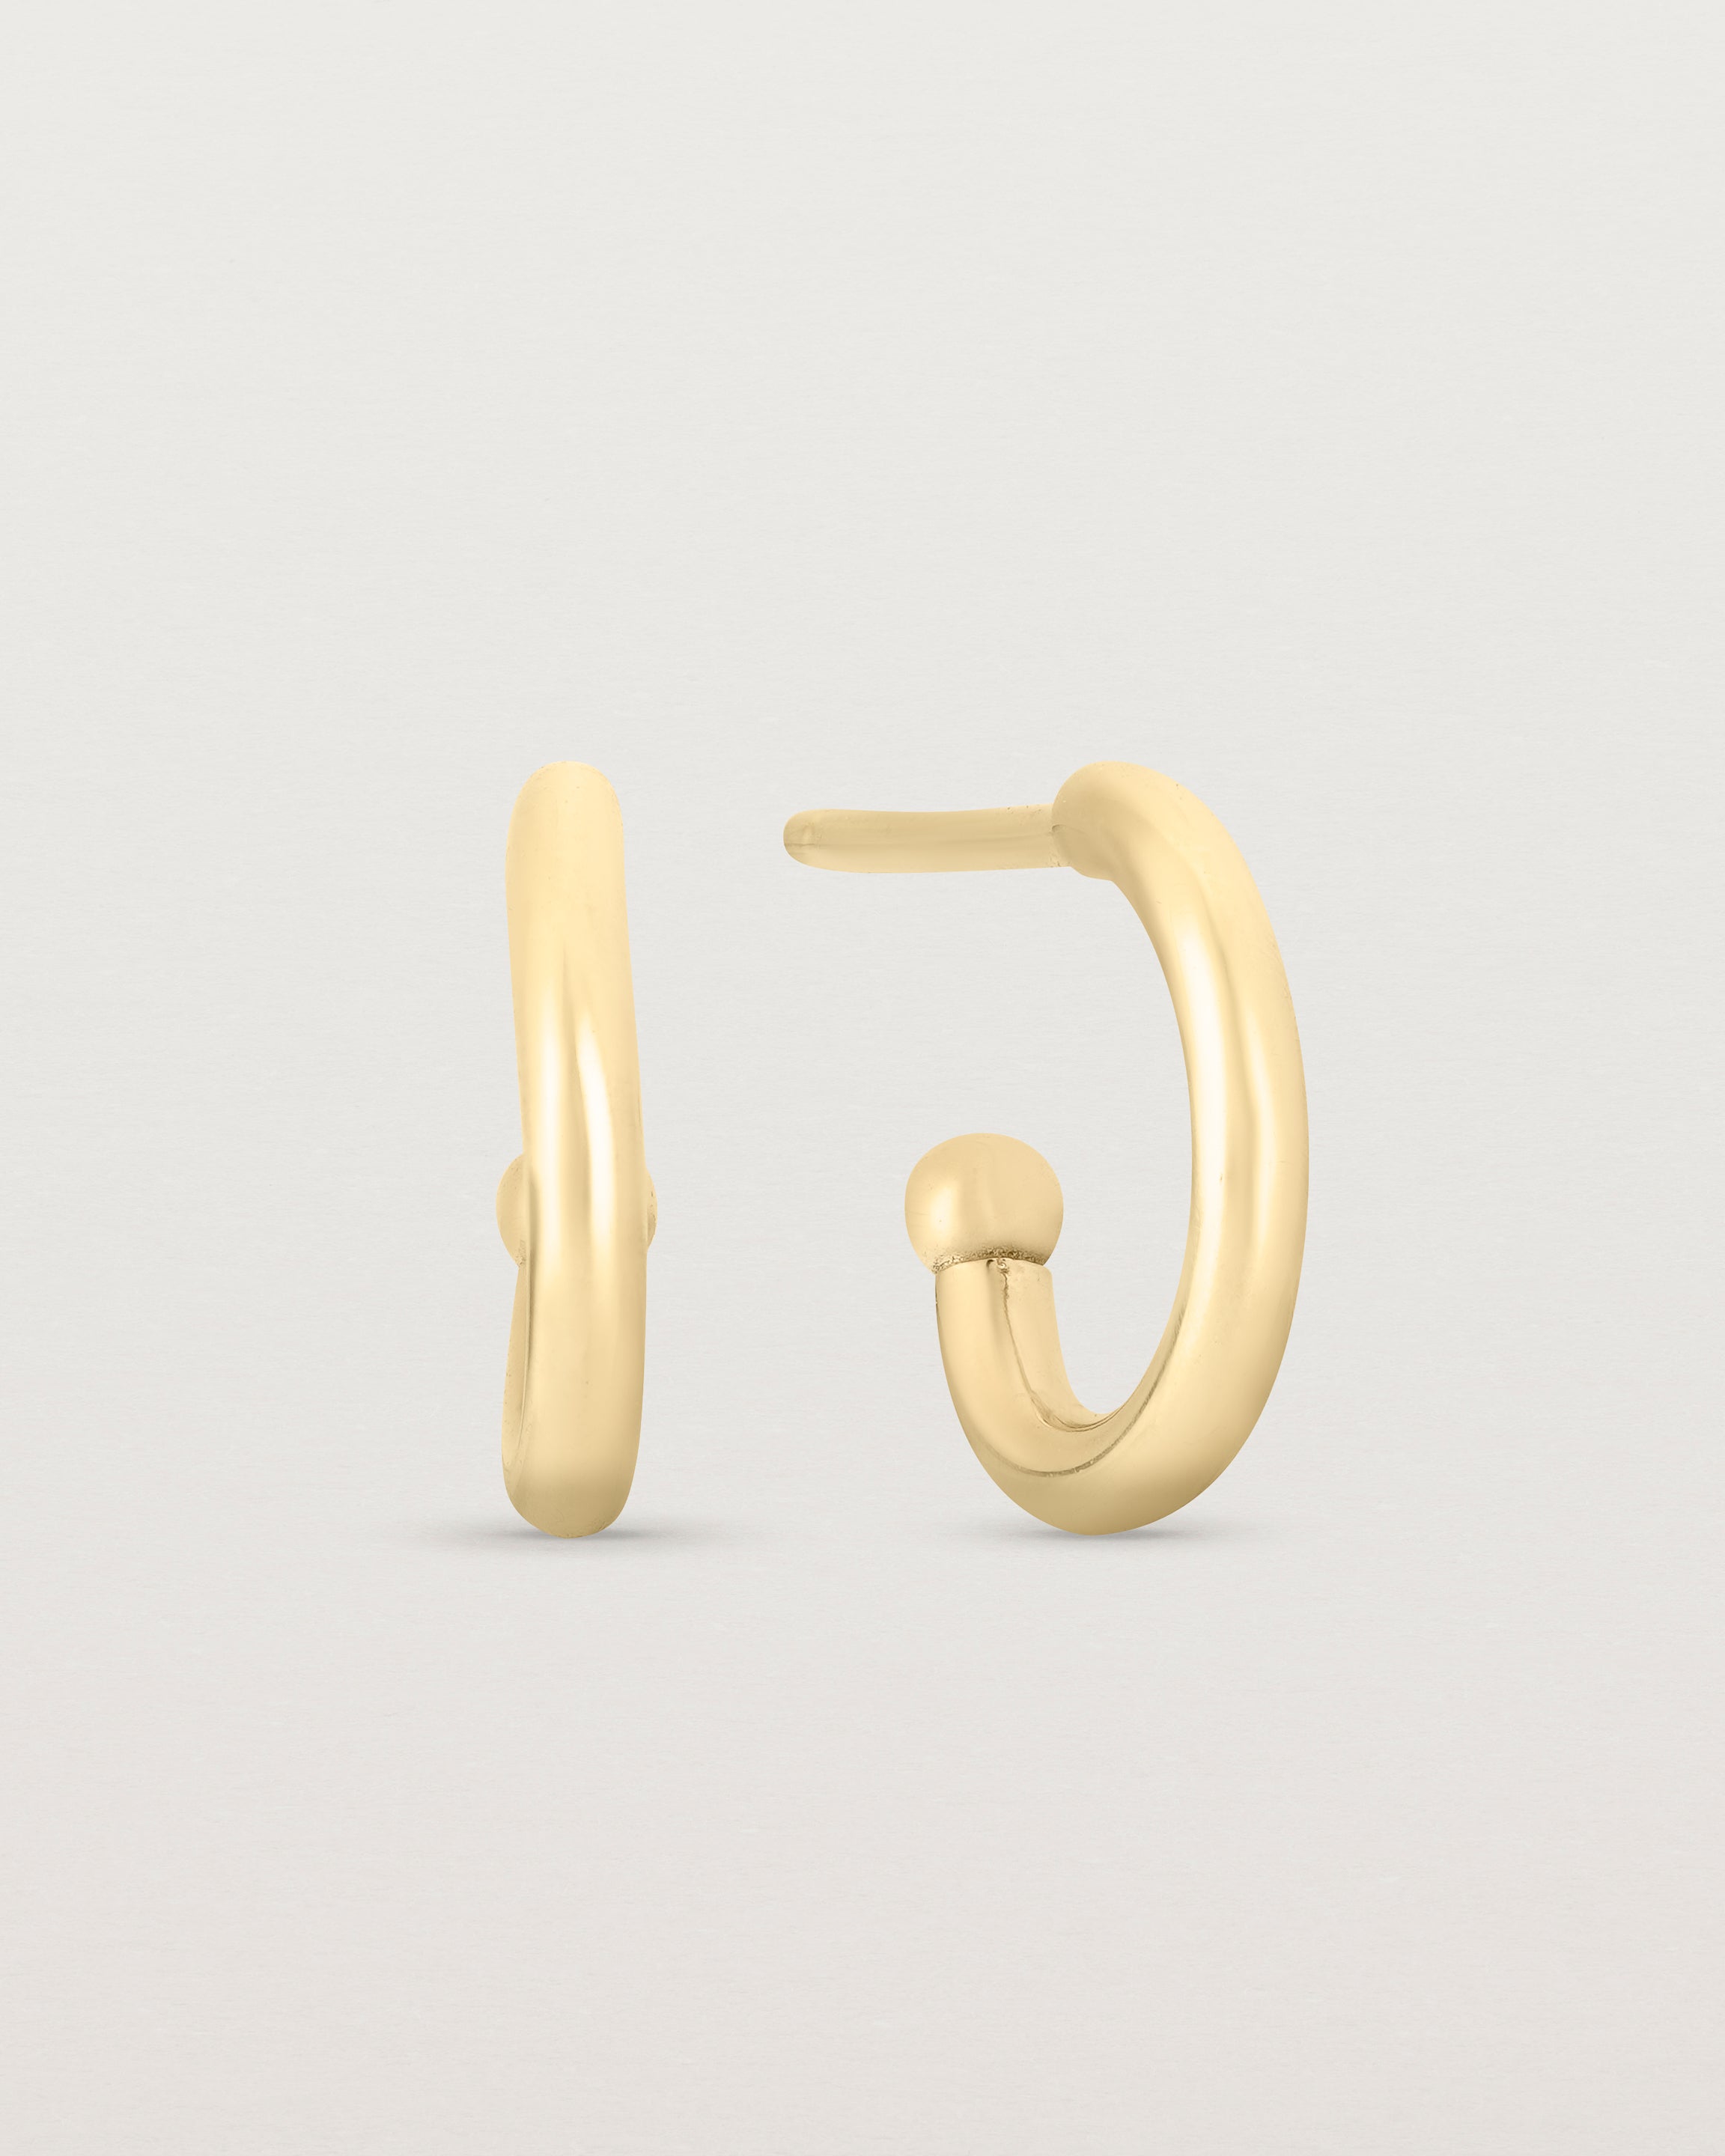 image of Petits suspend hoops in yellow gold